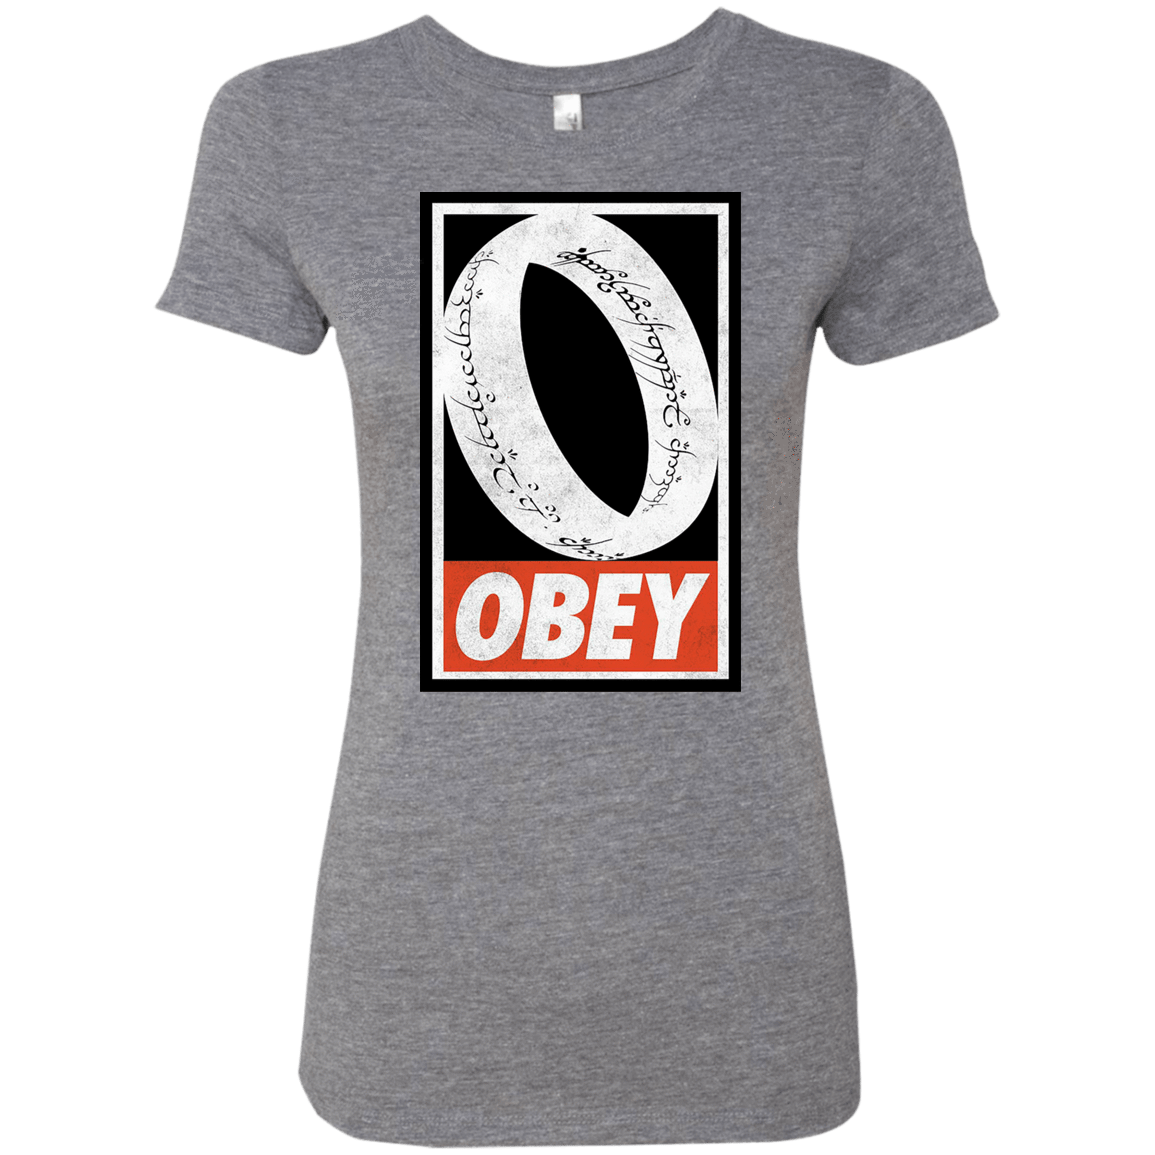 T-Shirts Premium Heather / S Obey One Ring Women's Triblend T-Shirt